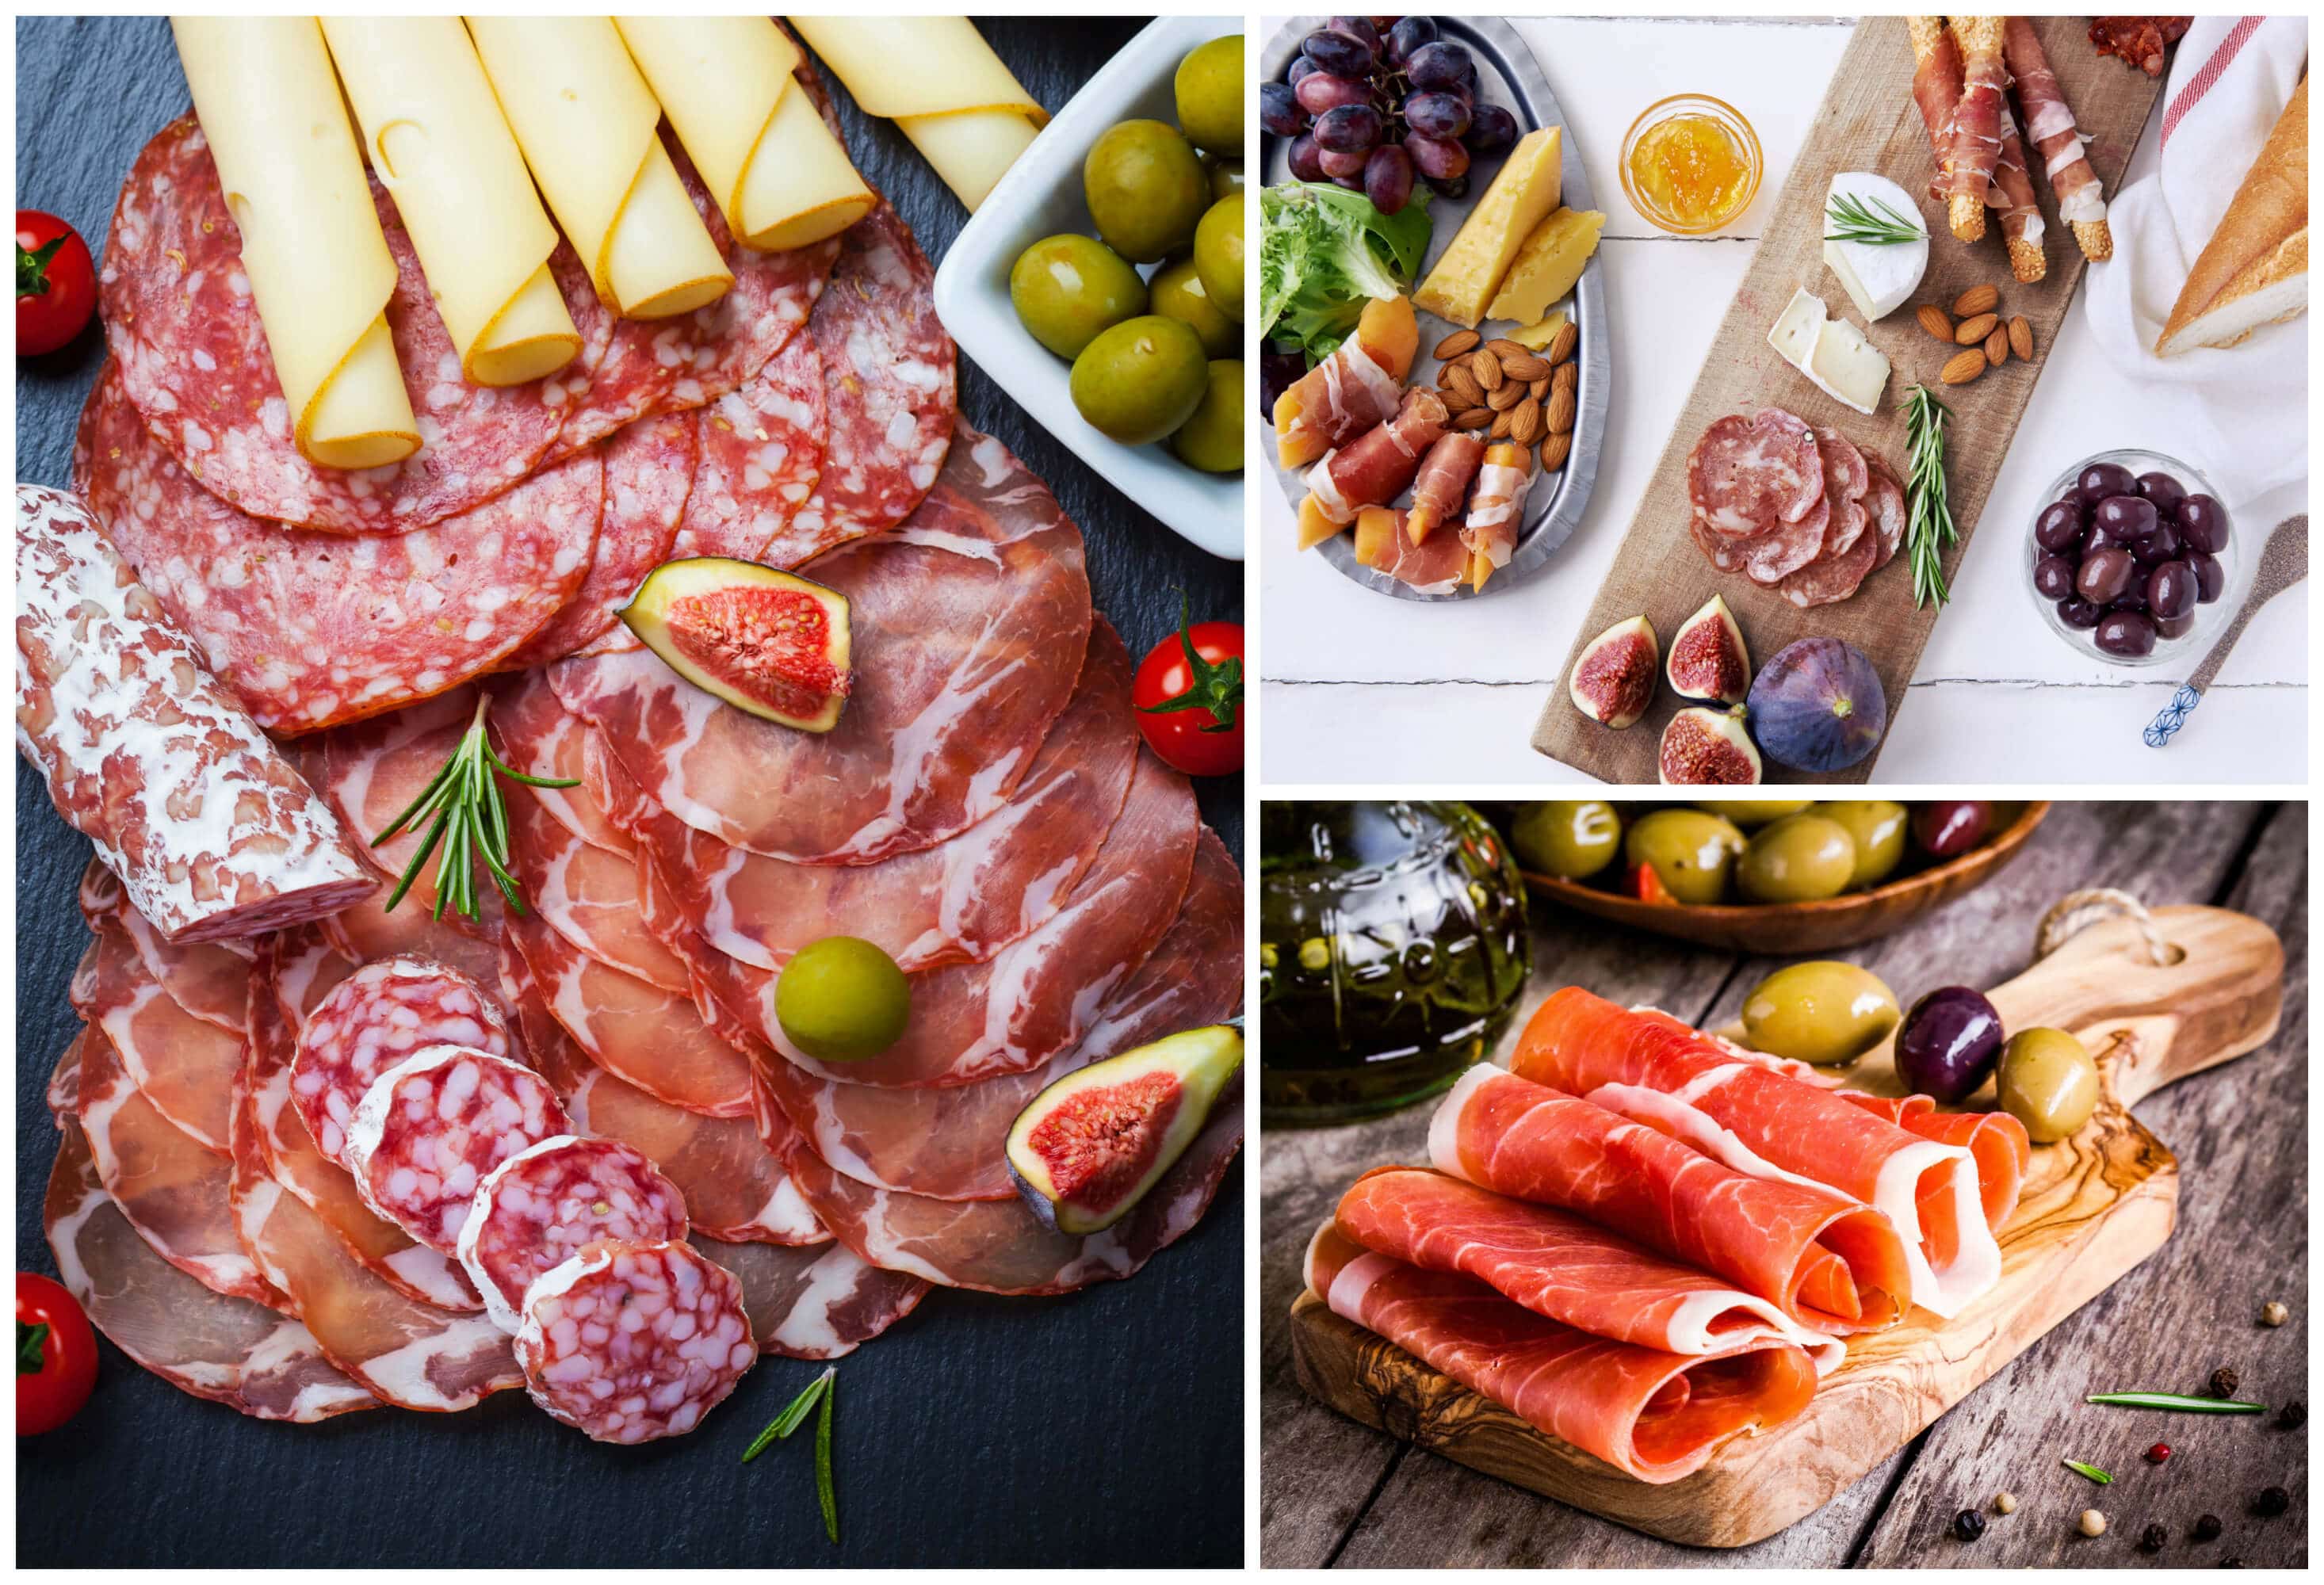 How To Create a Cheese & Charcuterie Board - The Daring Gourmet